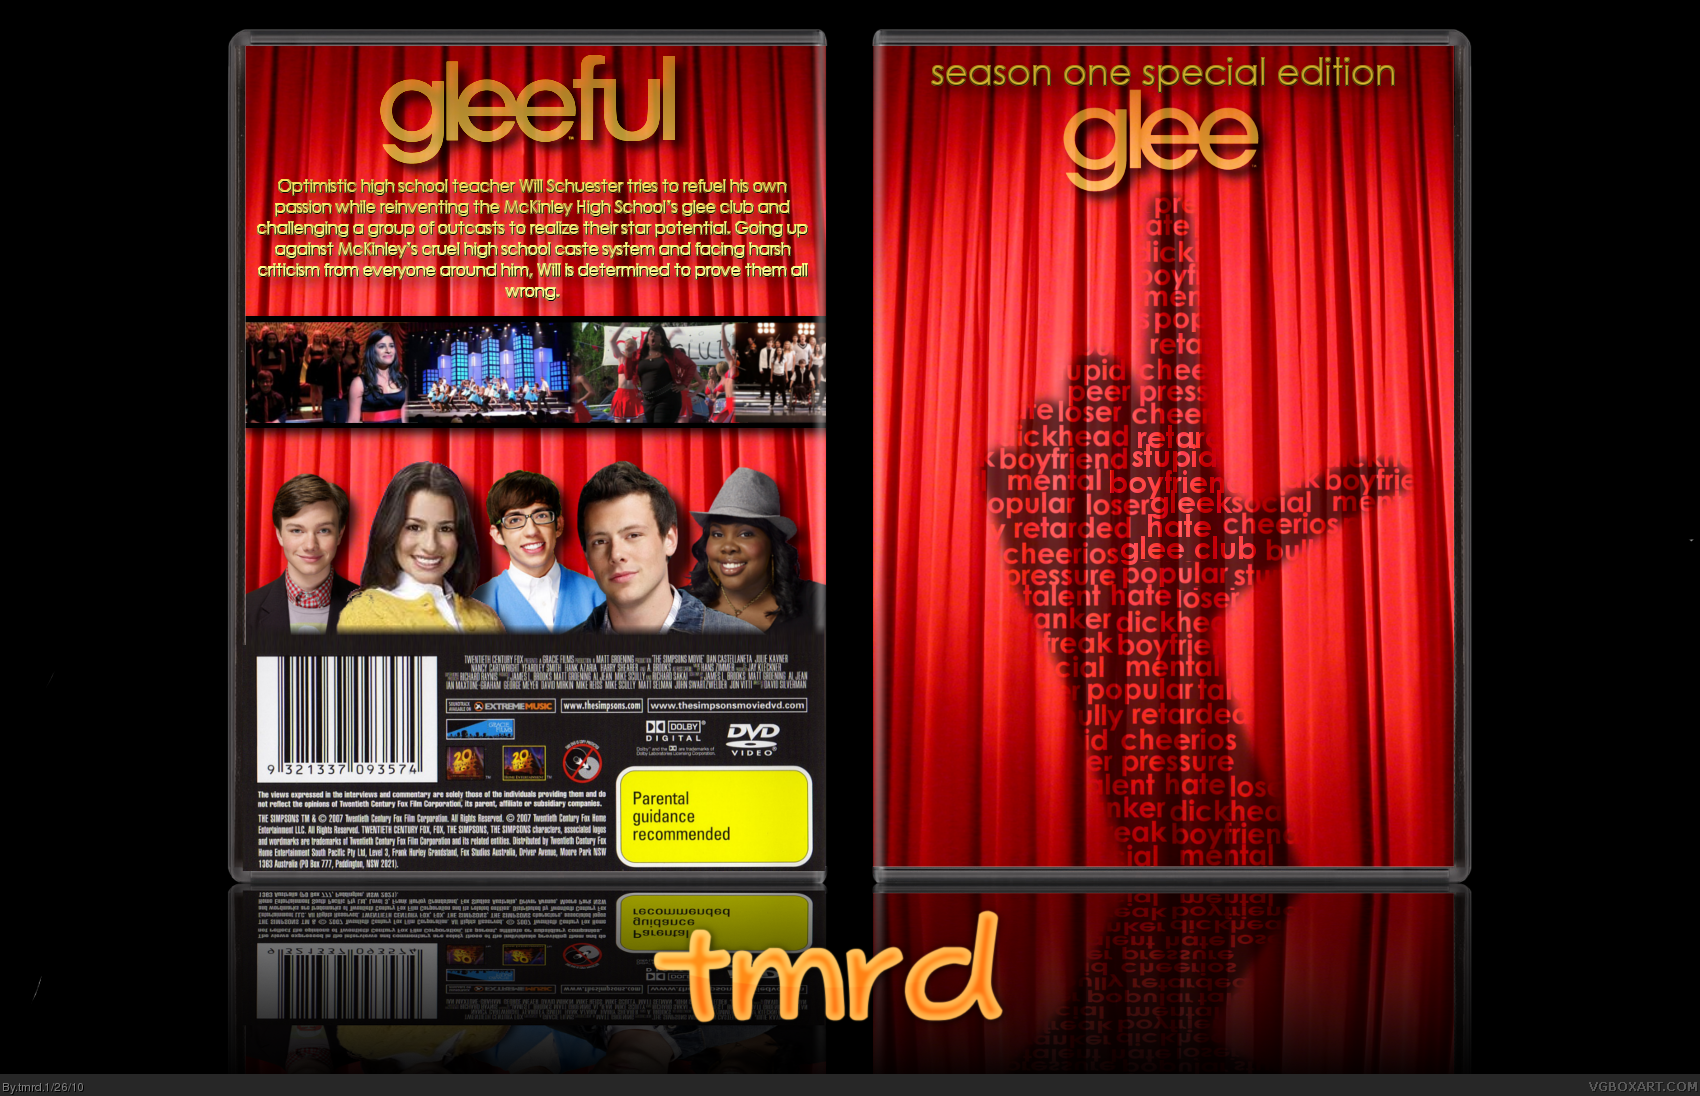 Glee: Season One, Special Edition box cover